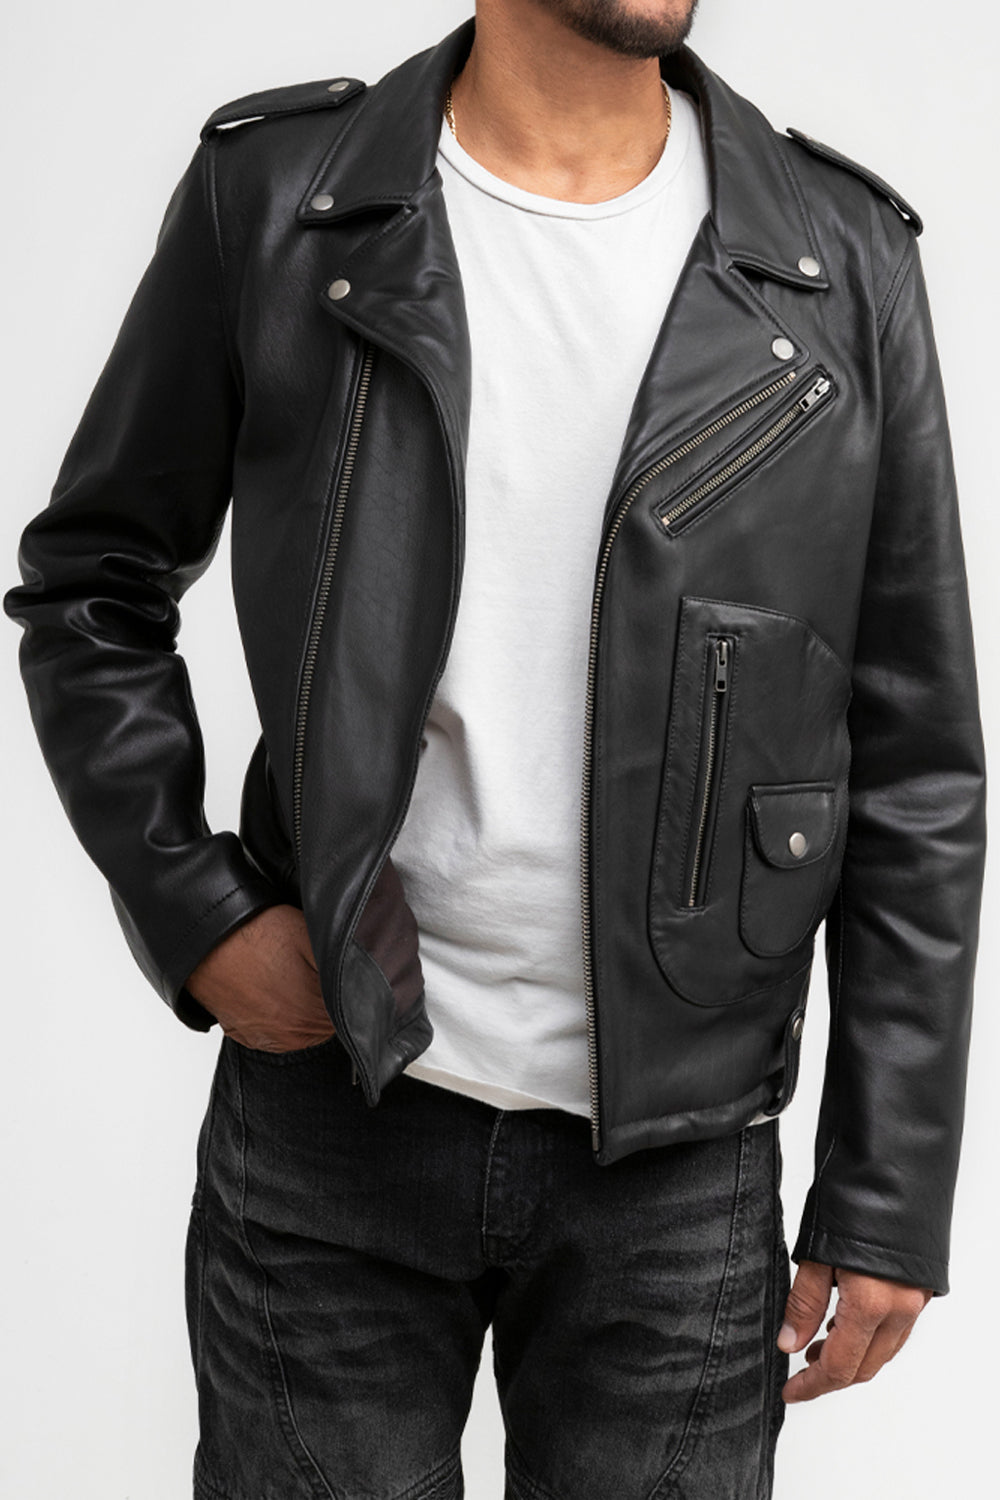 Our most recent Leather Jackets designs. Stay up to day on the latest  trends in fashion for mens and womens | Stylish jackets, Jacket design,  Leather jacket men